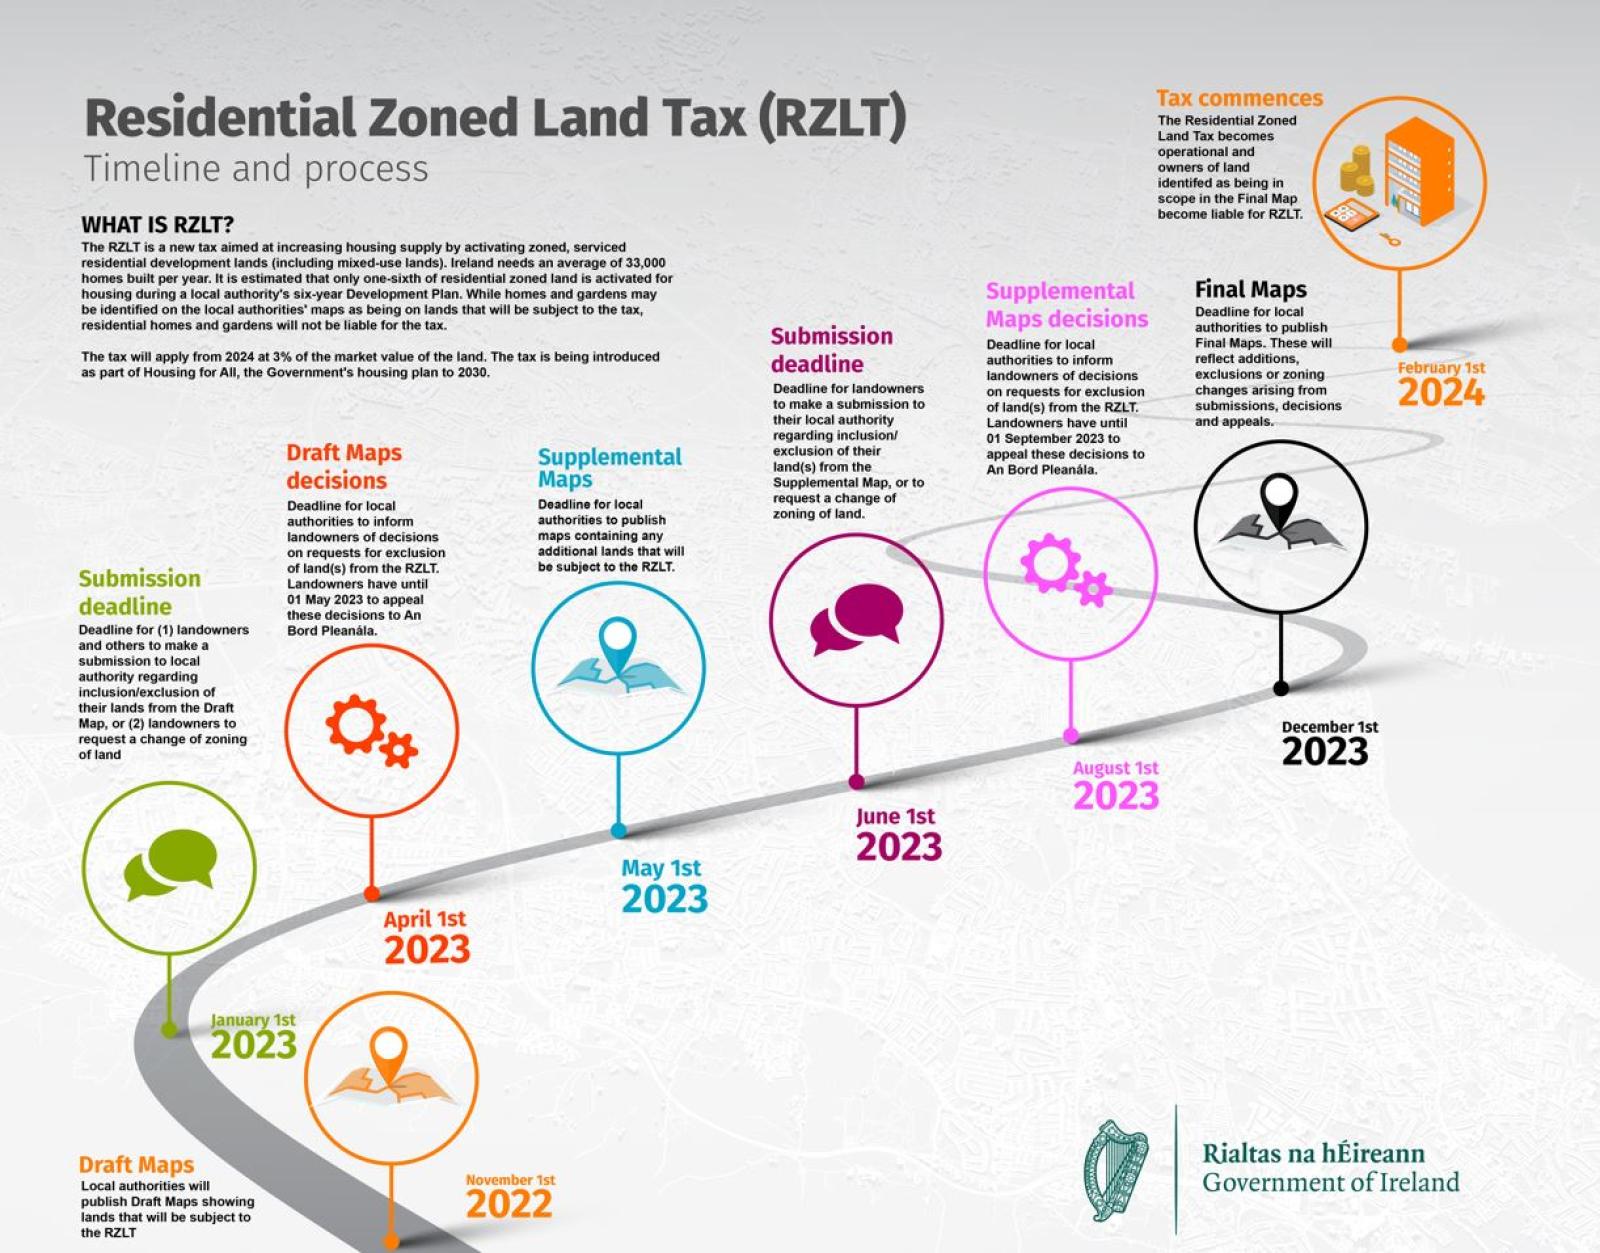 Residential Zoned Land Tax Timeline